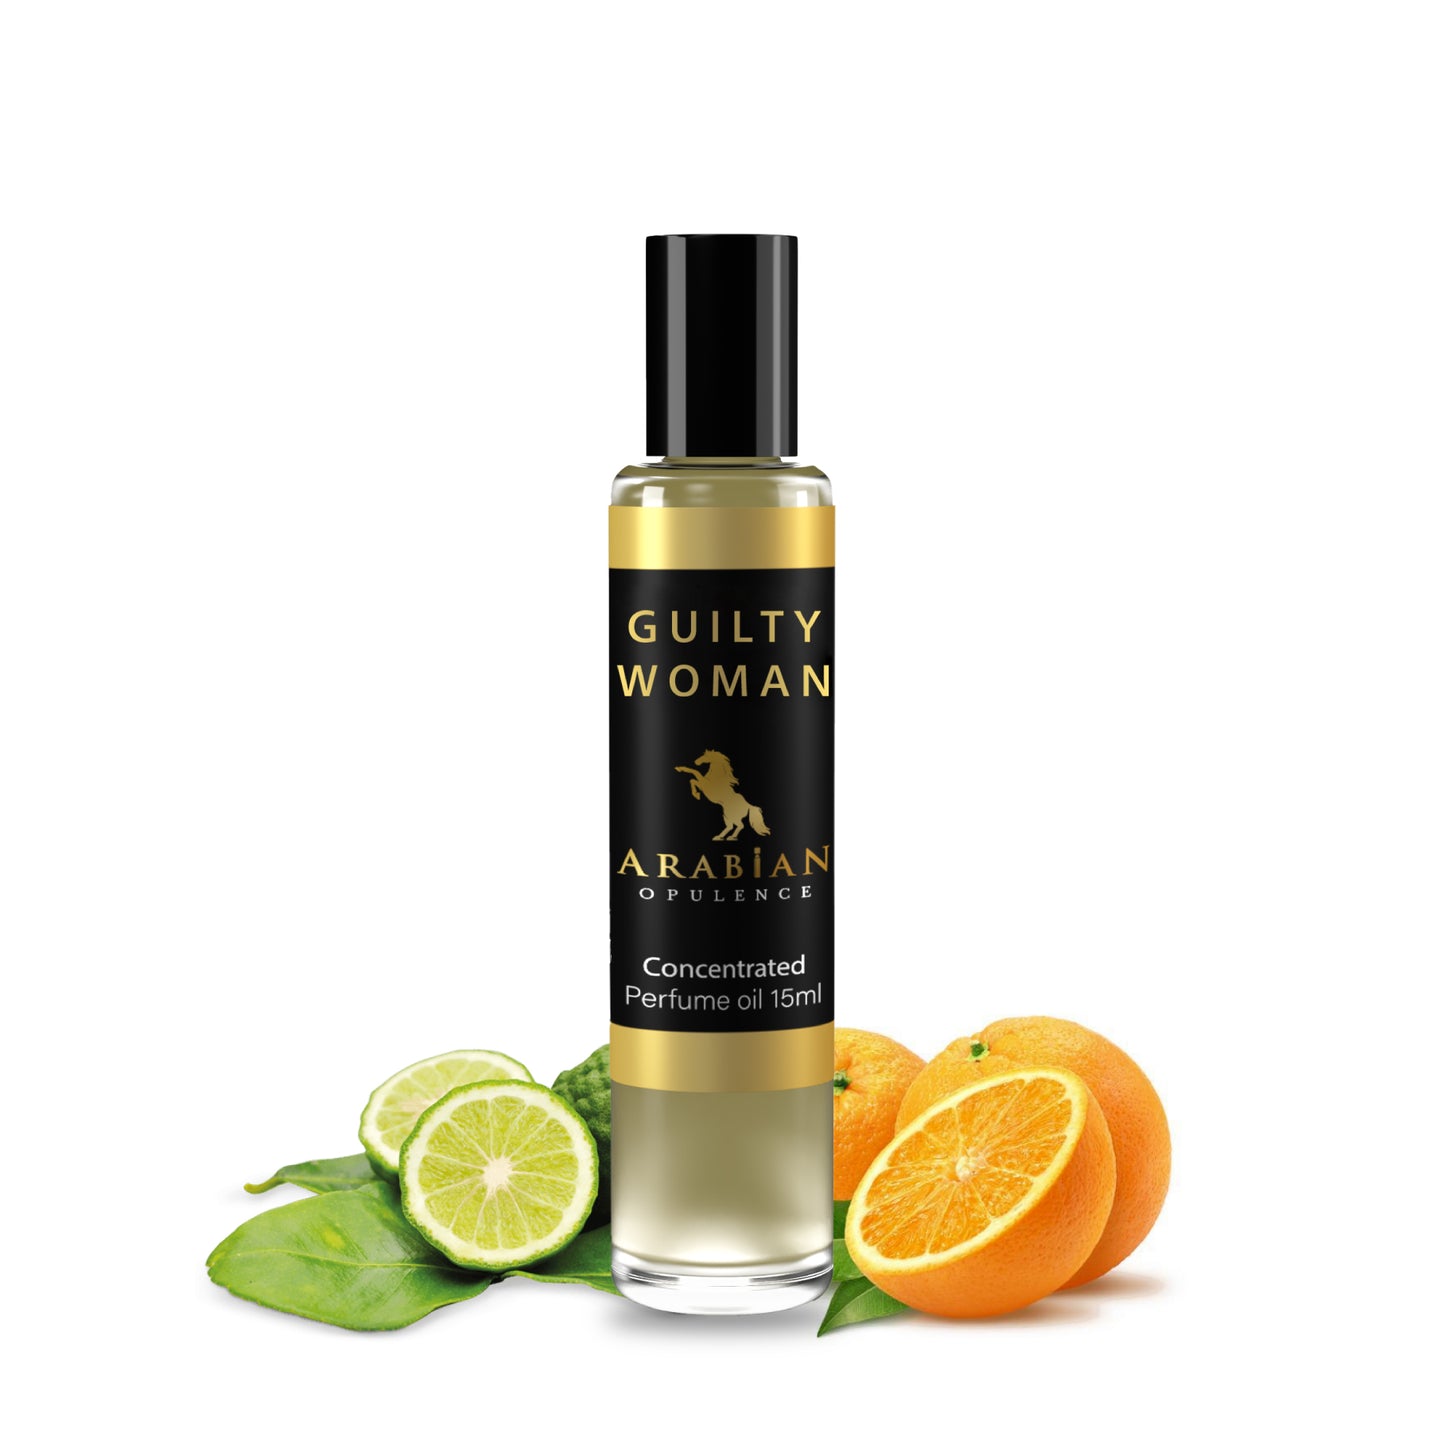 FR123 GUILTY WOMAN - Perfume Body Oil - Alcohol Free